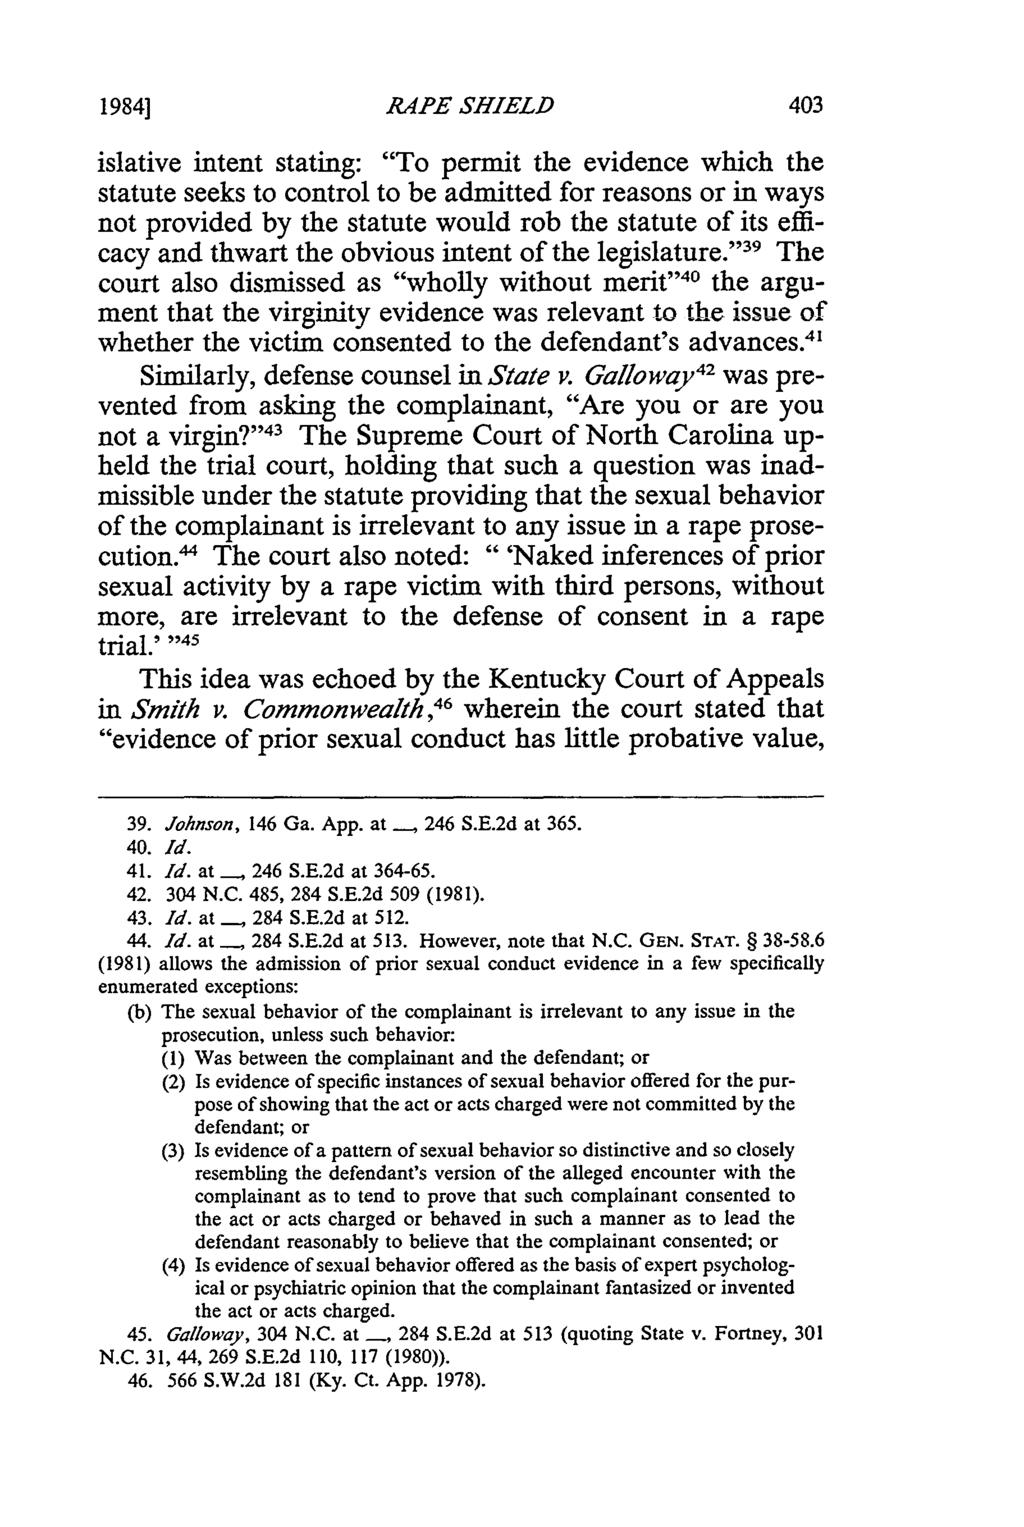 1984] RAPE SHIELD islative intent stating: "To permit the evidence which the statute seeks to control to be admitted for reasons or in ways not provided by the statute would rob the statute of its